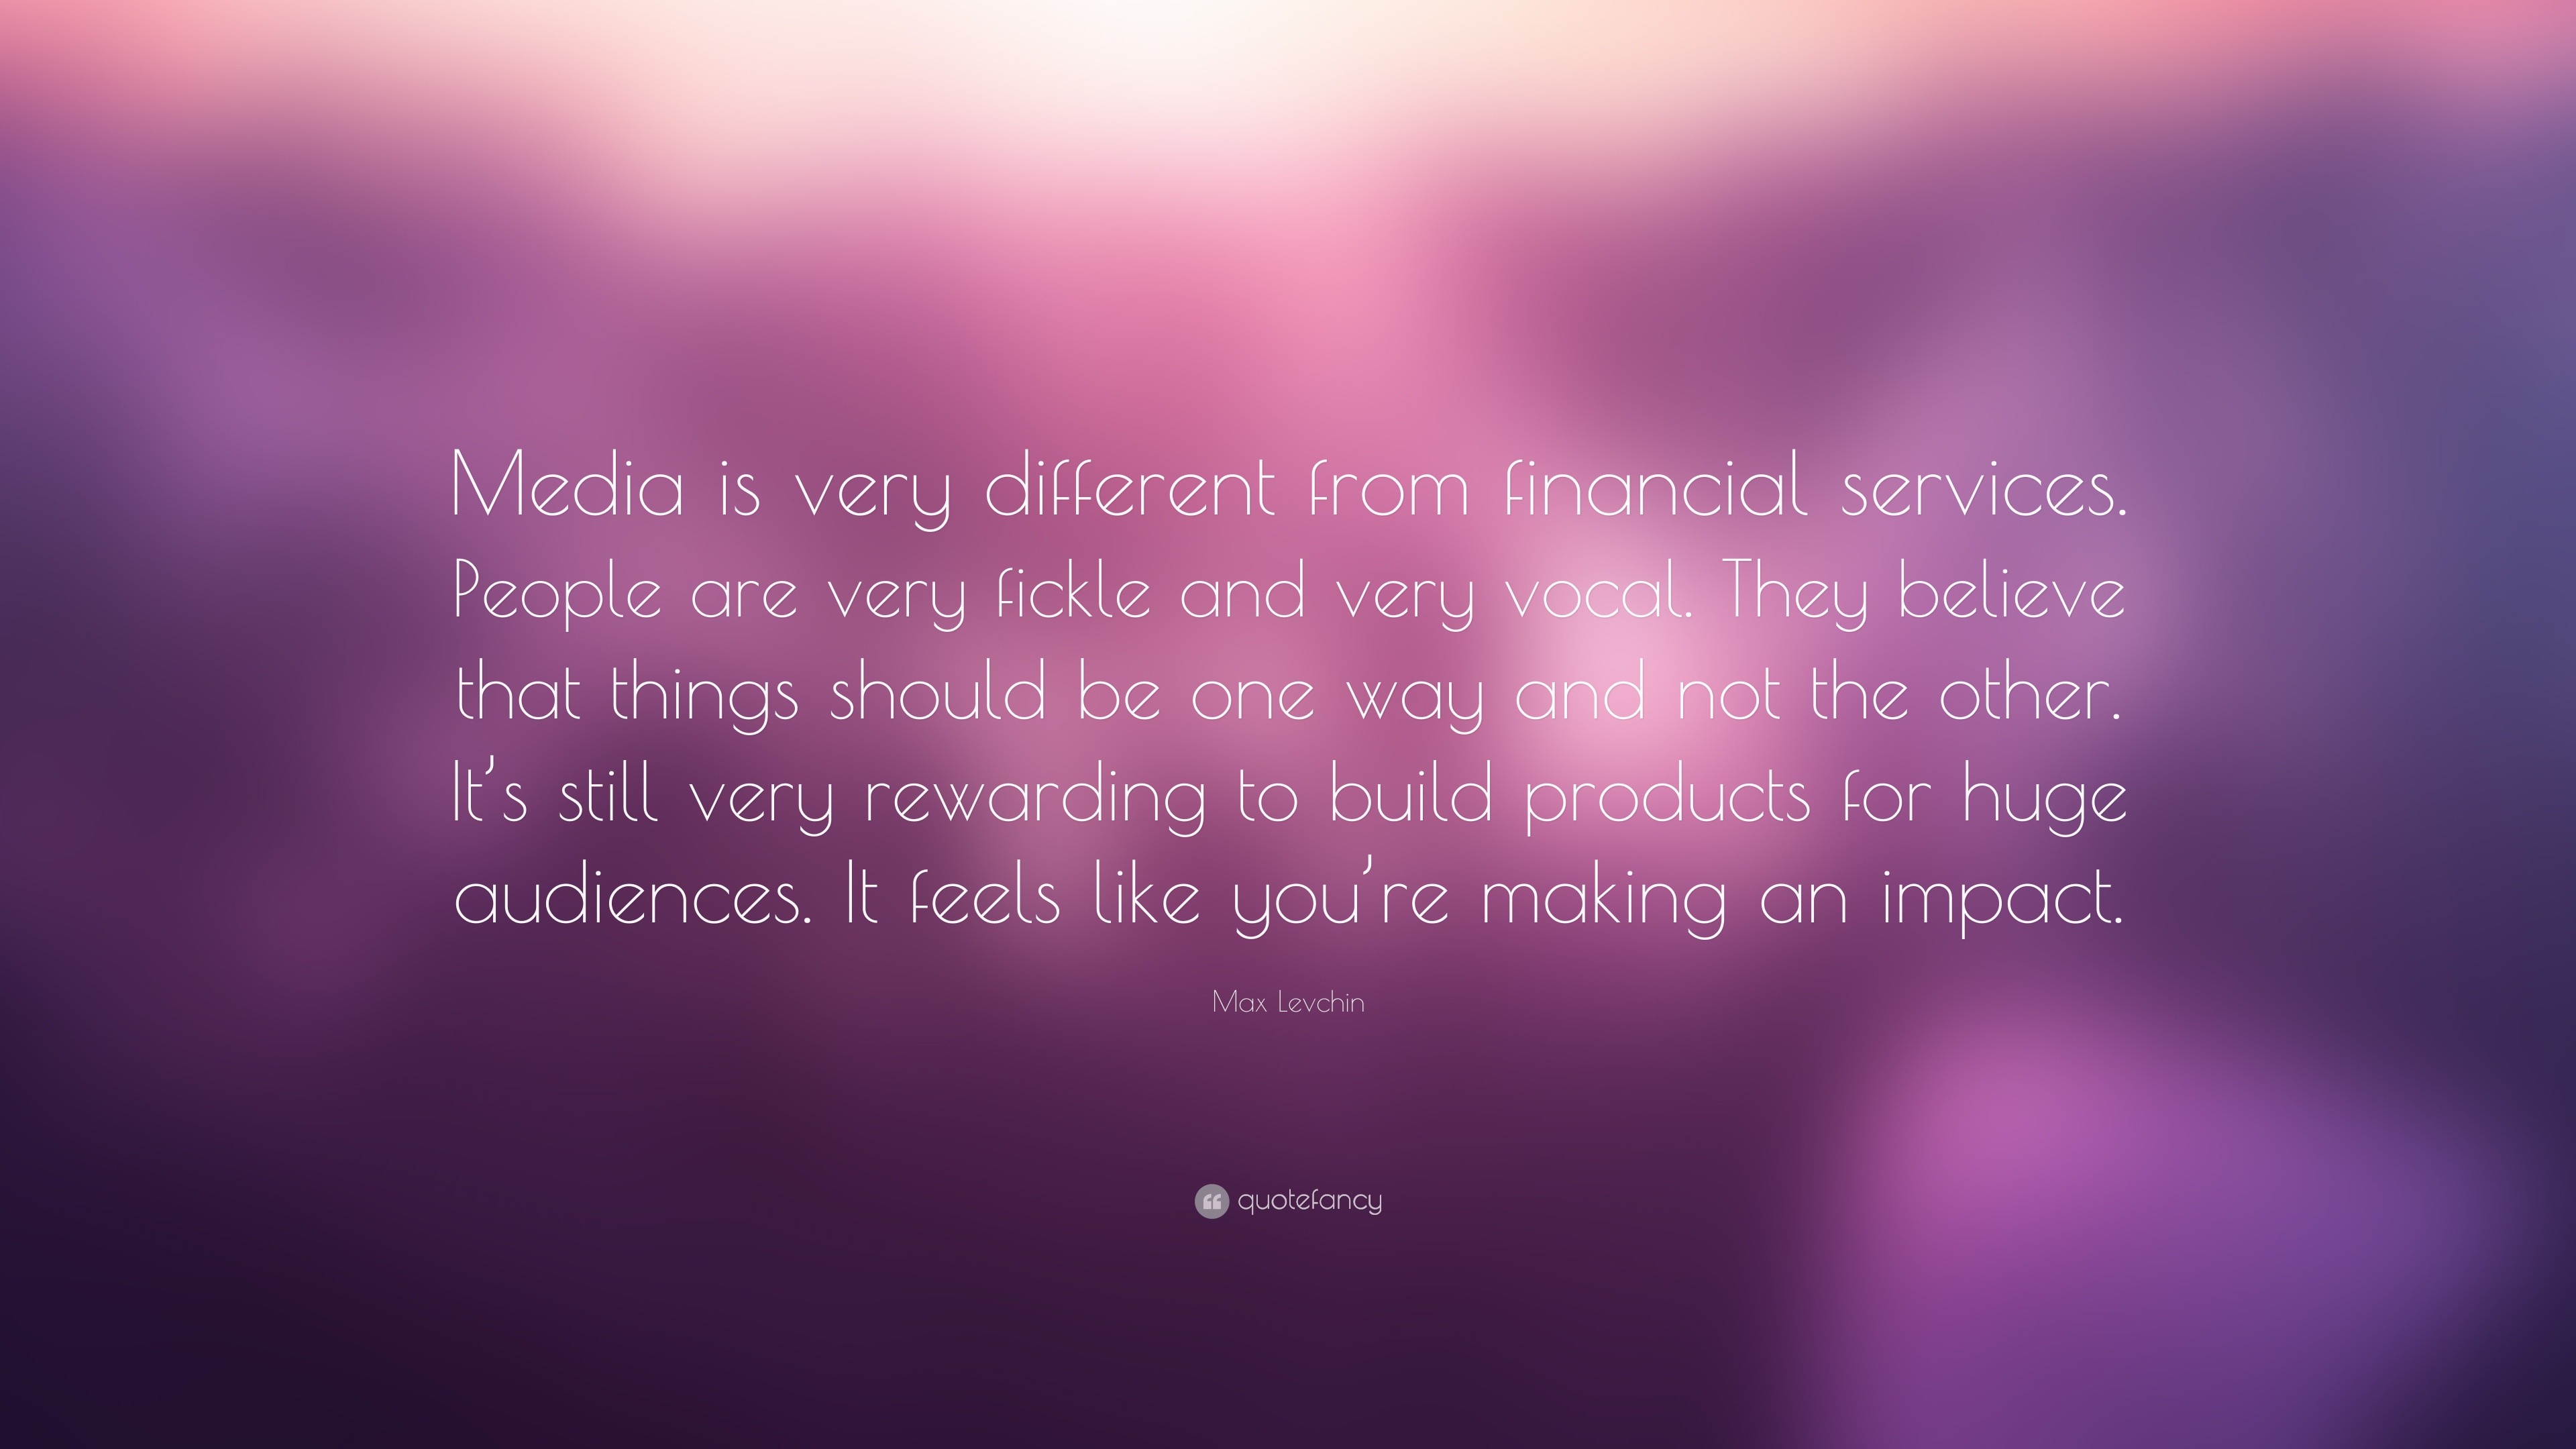 Max Levchin Quote: “Media is very different from financial services ...